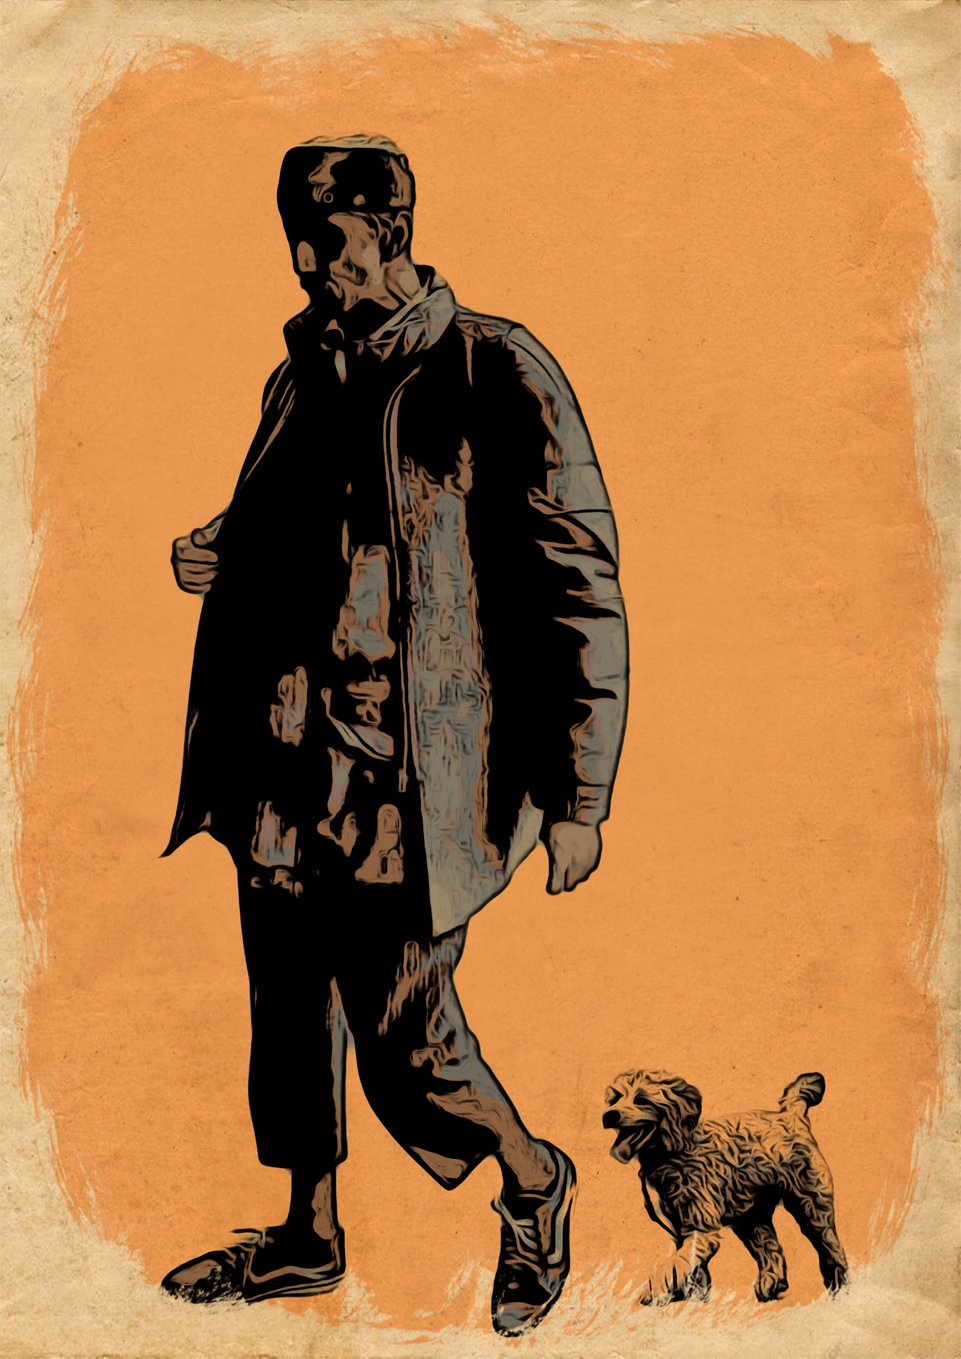 An unique painting depicting a man wearing a cap and walking with a his dog by his side. The man is wearing a long jacket , and both the man and the dog are portrayed in a semi-realistic style. The painting showcases subtle colors and captures a peaceful and joyful atmosphere.